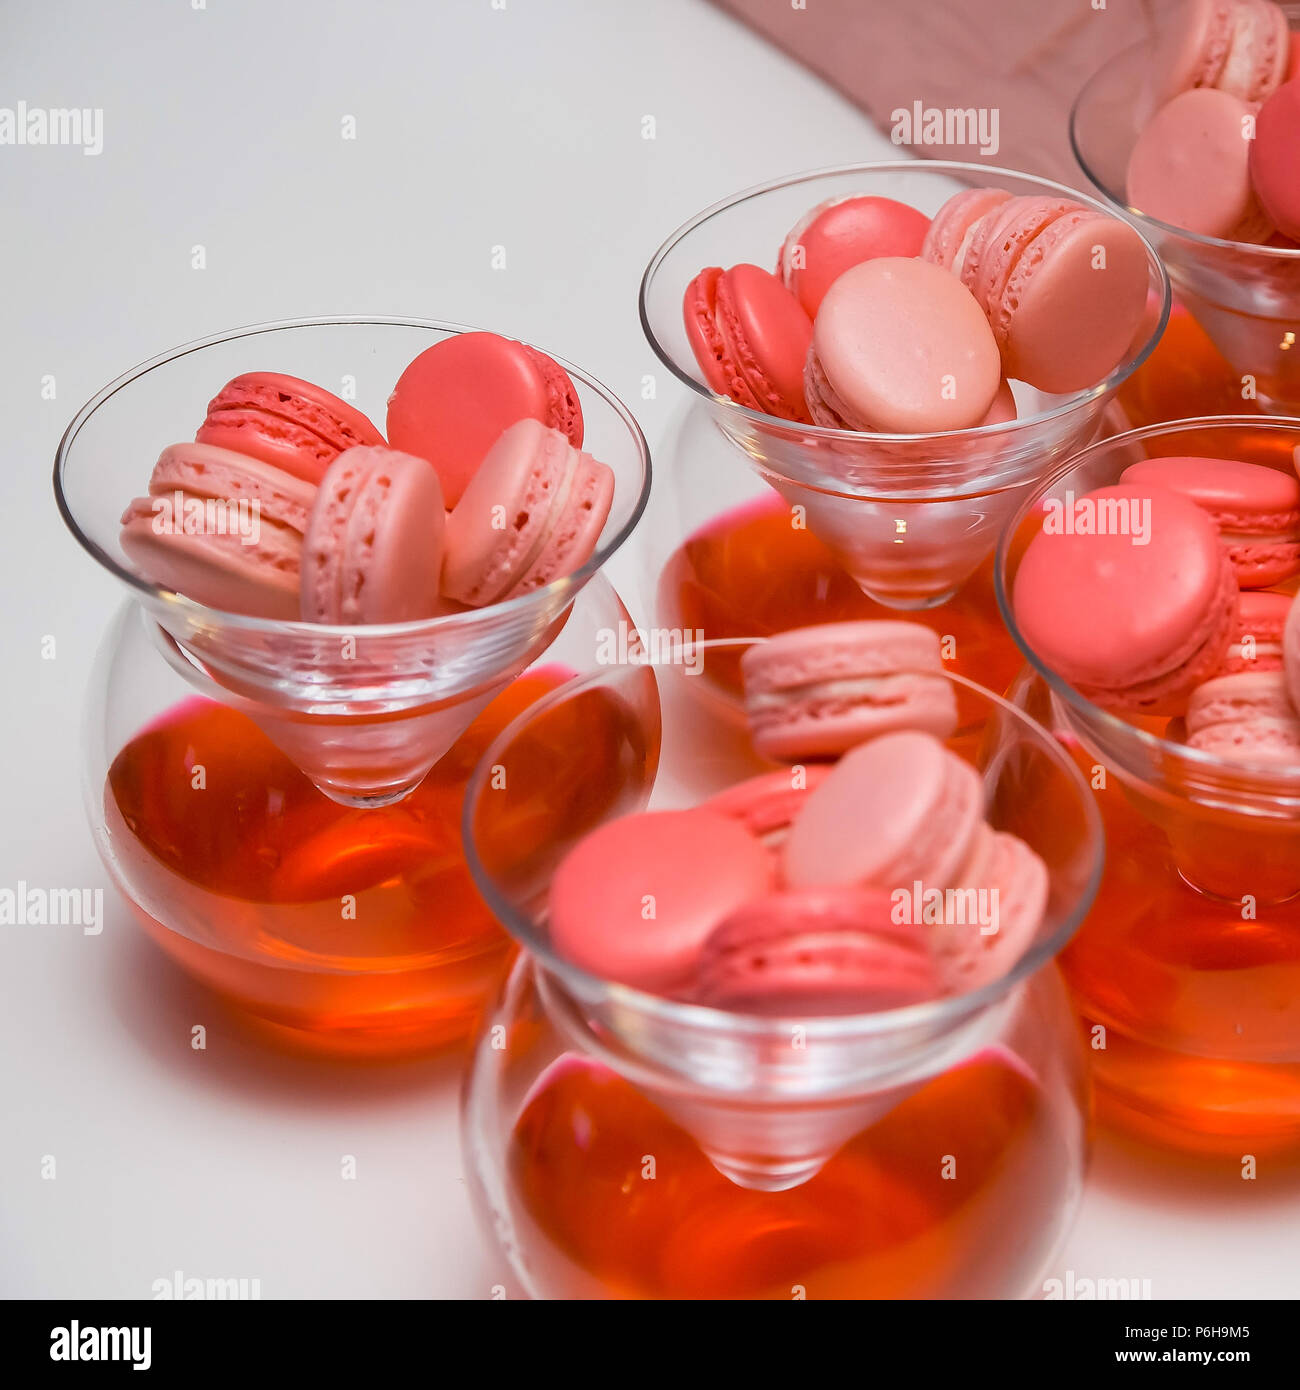 Display of sweet pink dessert cake macaroons for catering at gala dinner banquet event Stock Photo